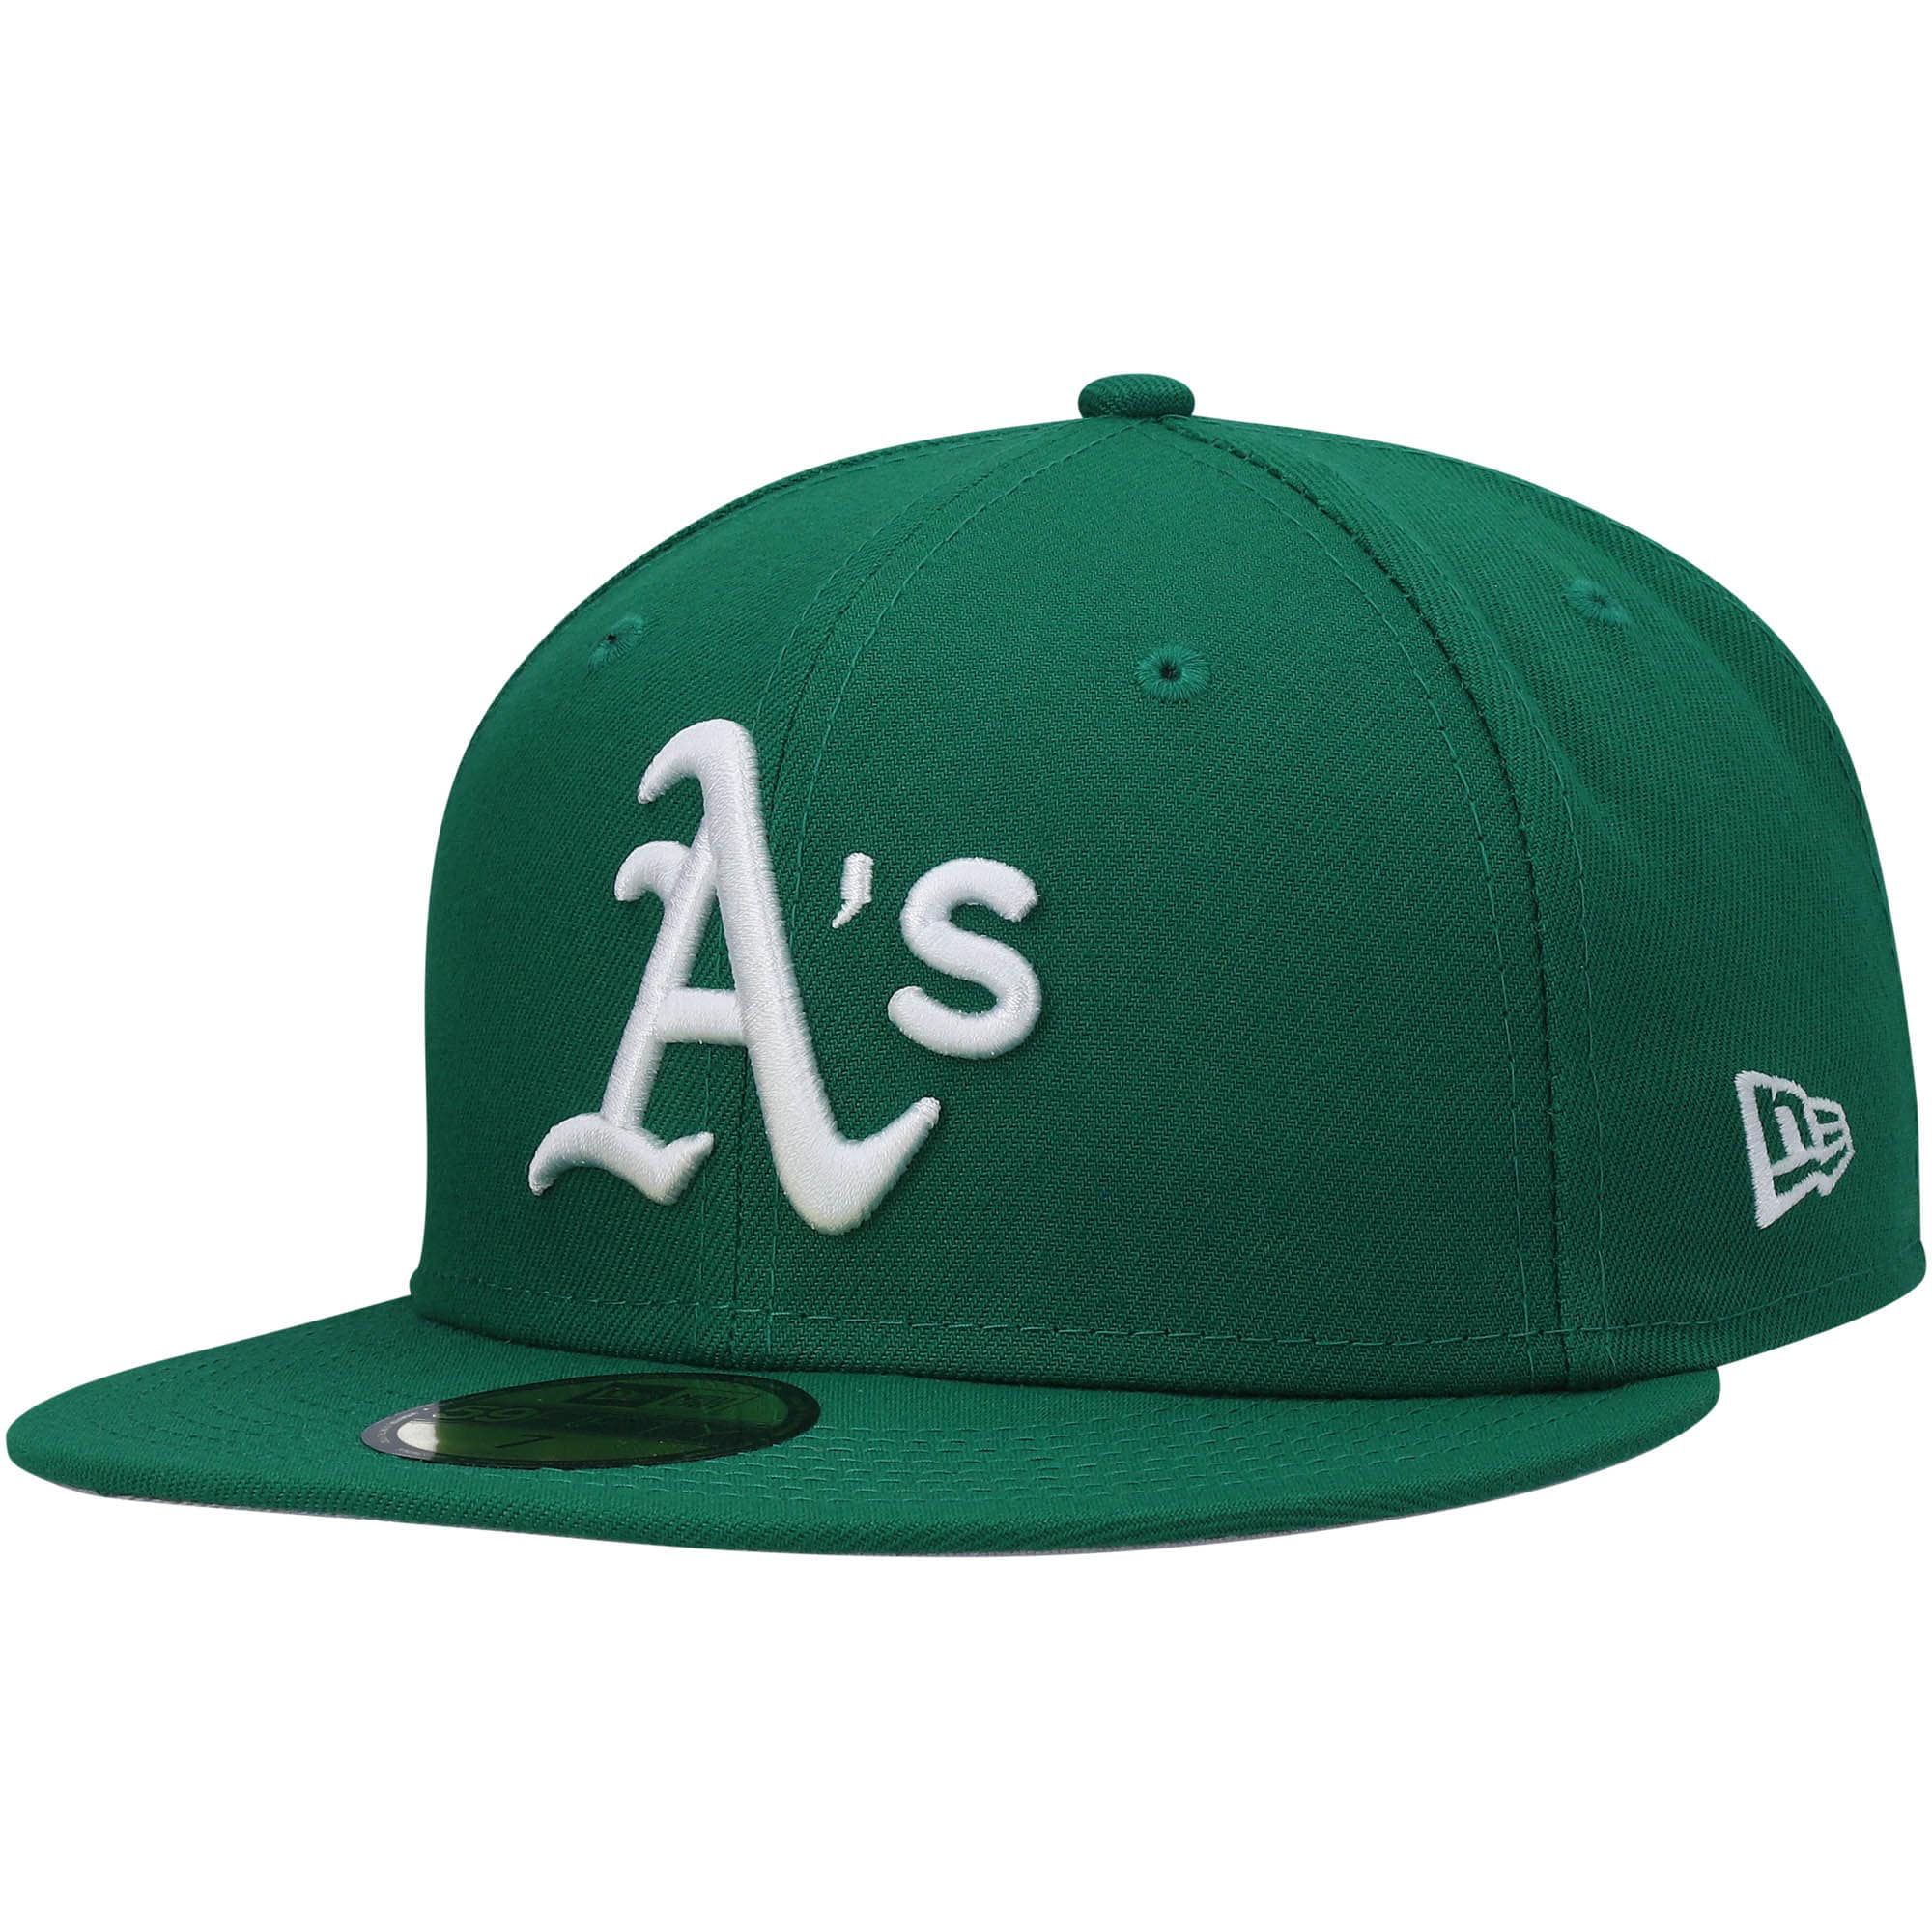 Men's New Era Kelly Green Oakland Athletics White Logo 59FIFTY Fitted ...